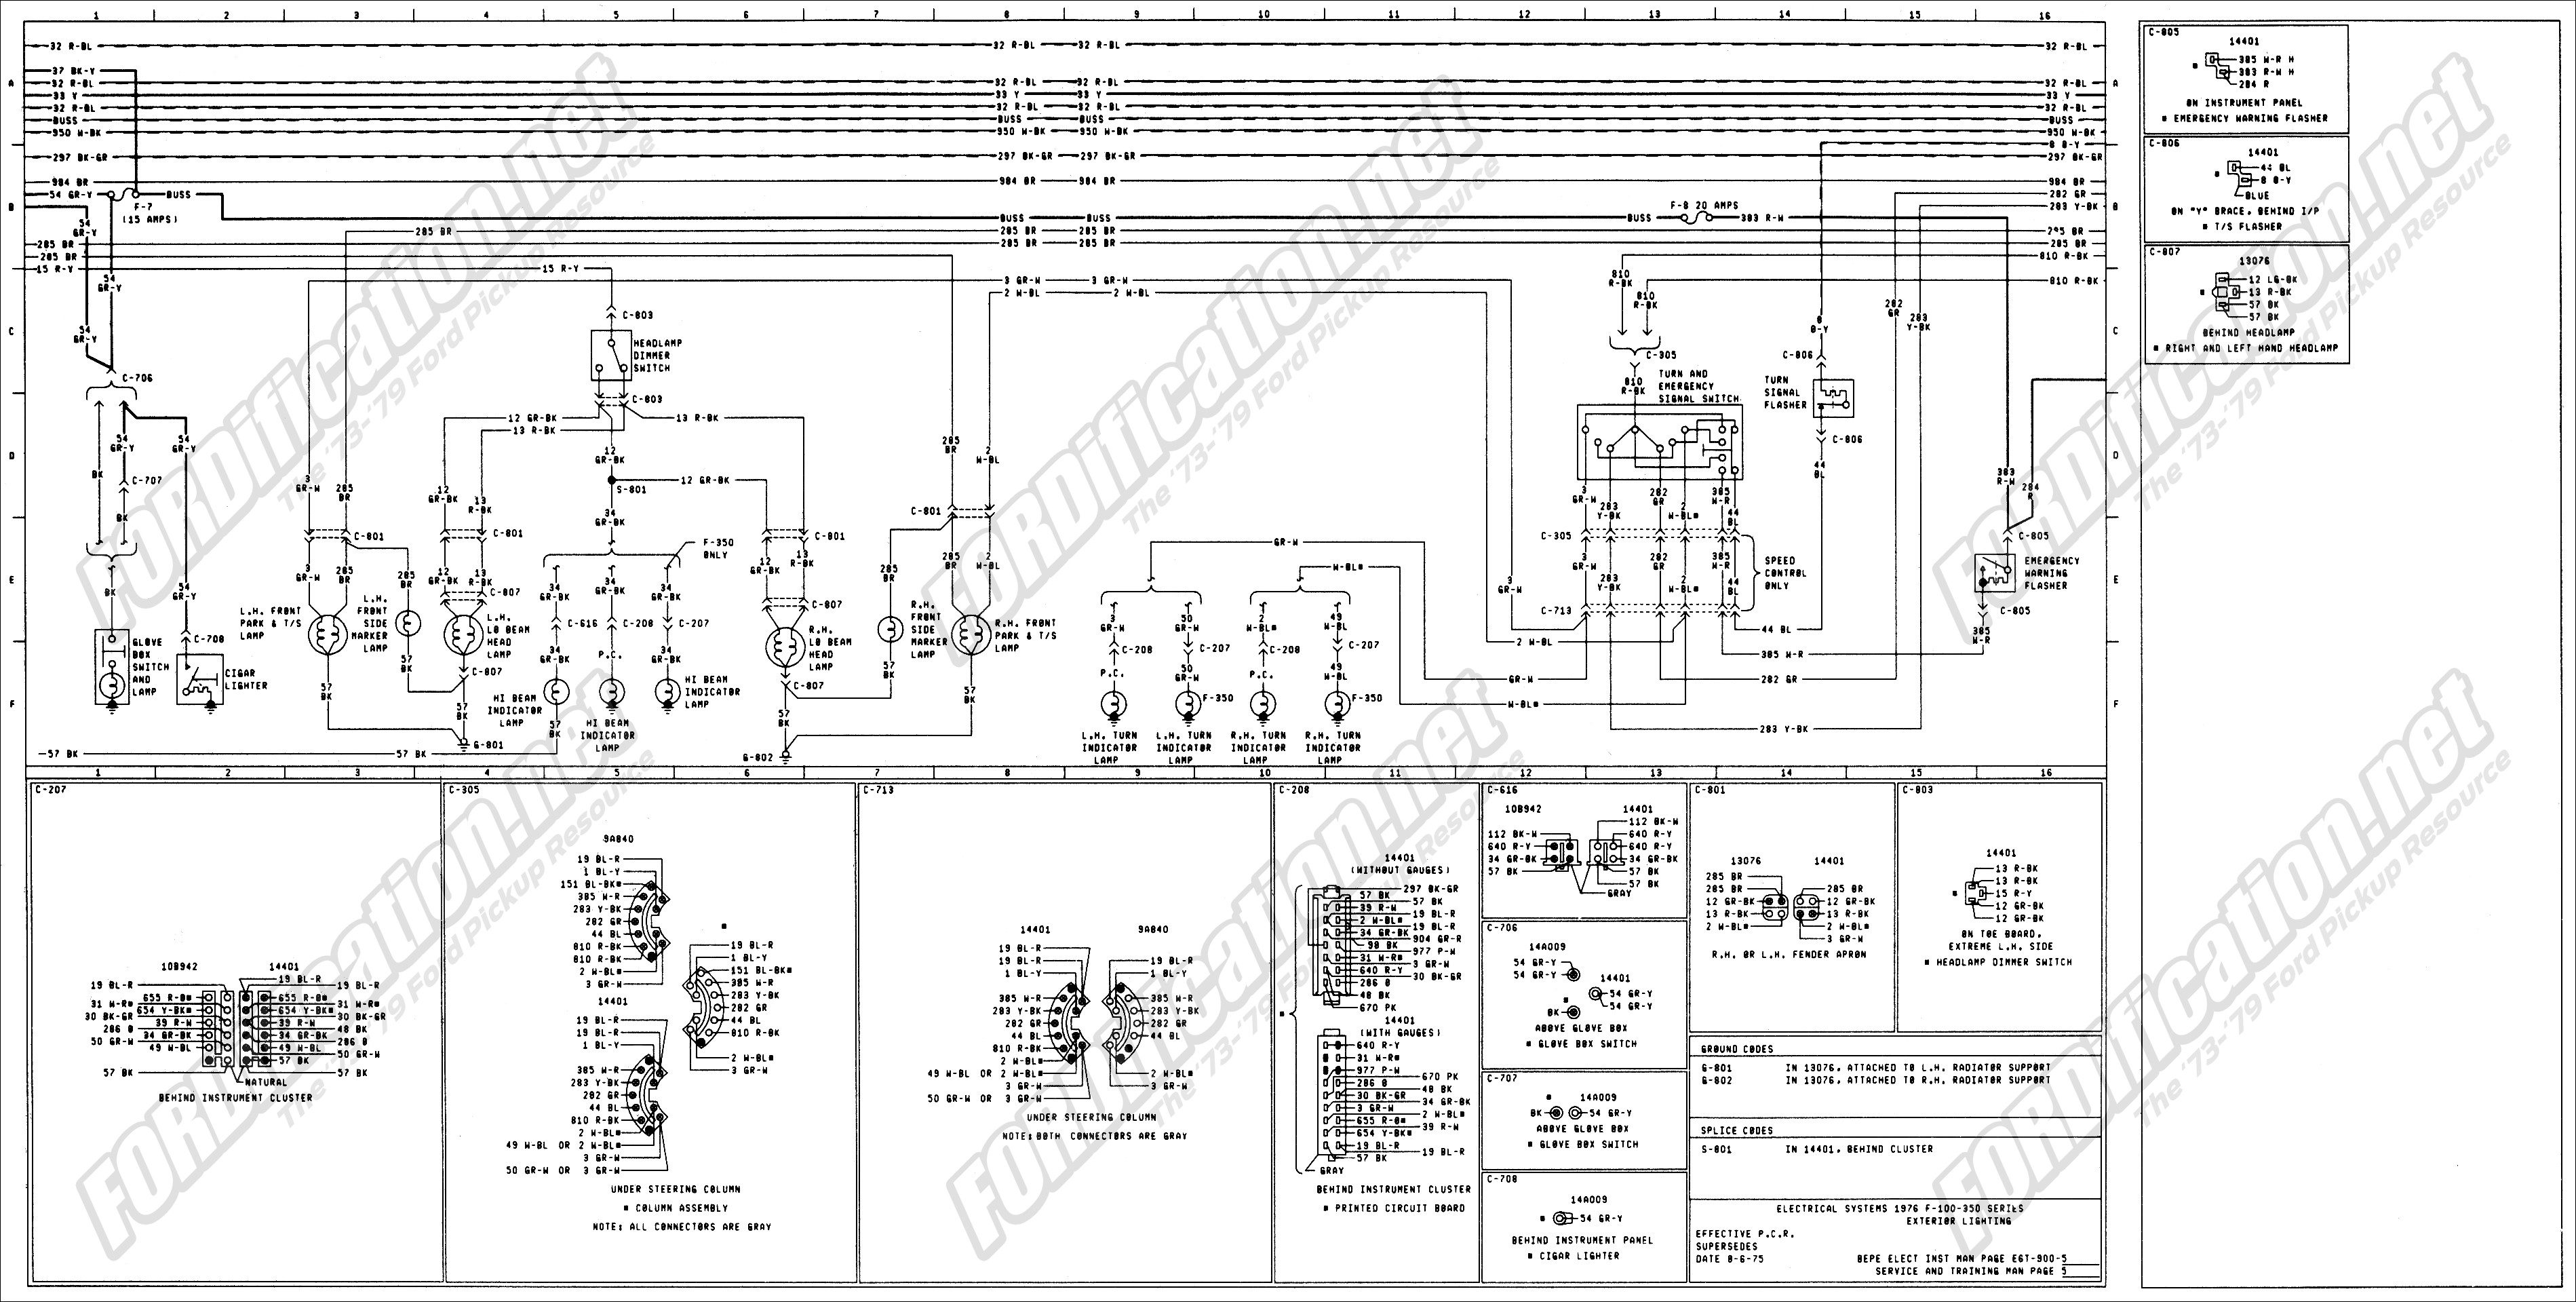 Wiring Diagram for ford F150 Trailer Lights From Truck 77 ford F250 Wiring Diagram Wiring Info • Of Wiring Diagram for ford F150 Trailer Lights From Truck